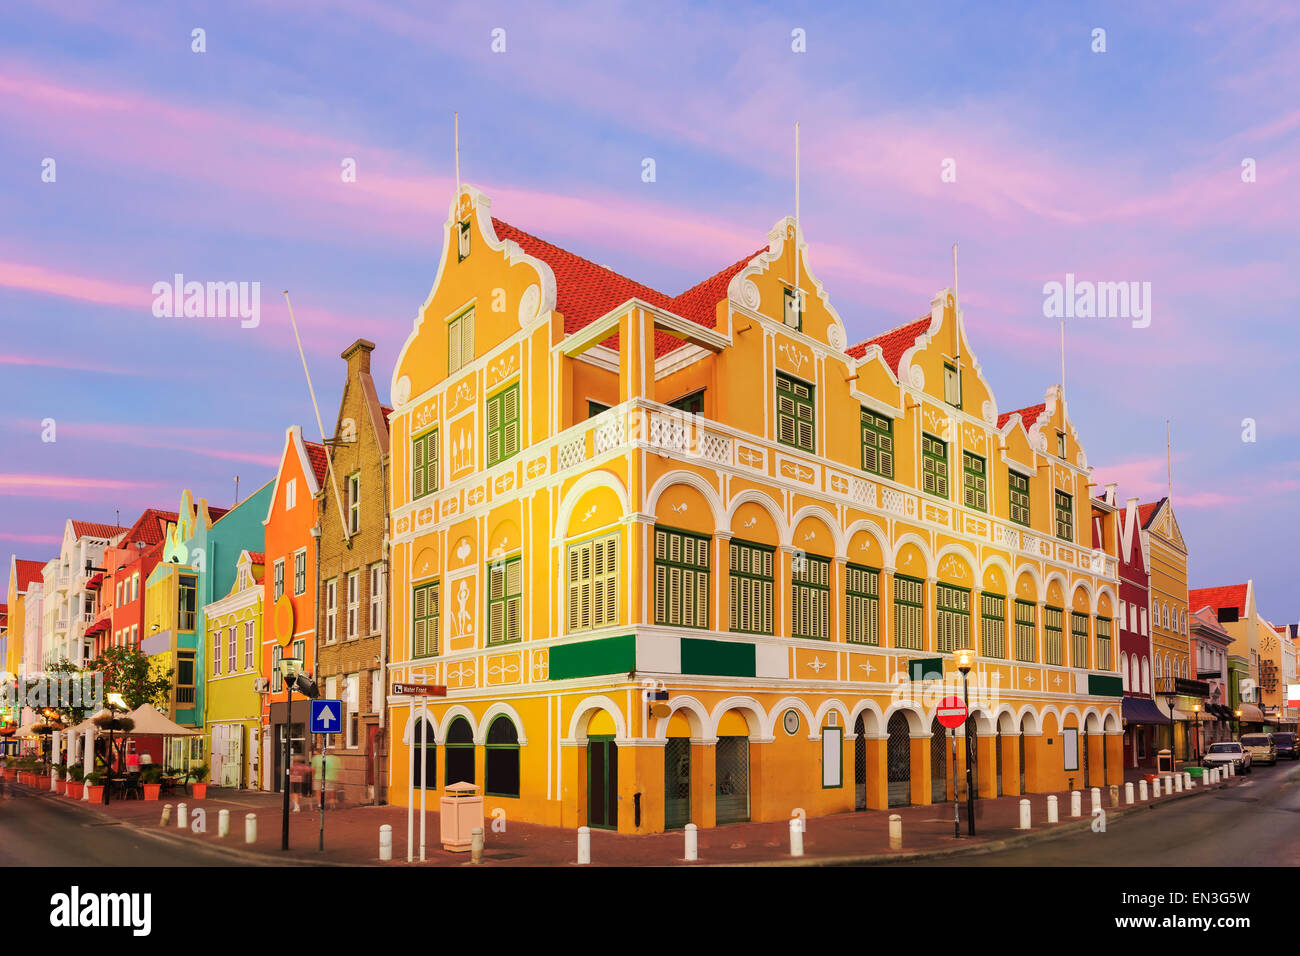 Downtown Willemstad at twilight, Curacao, Netherlands Antilles Stock Photo